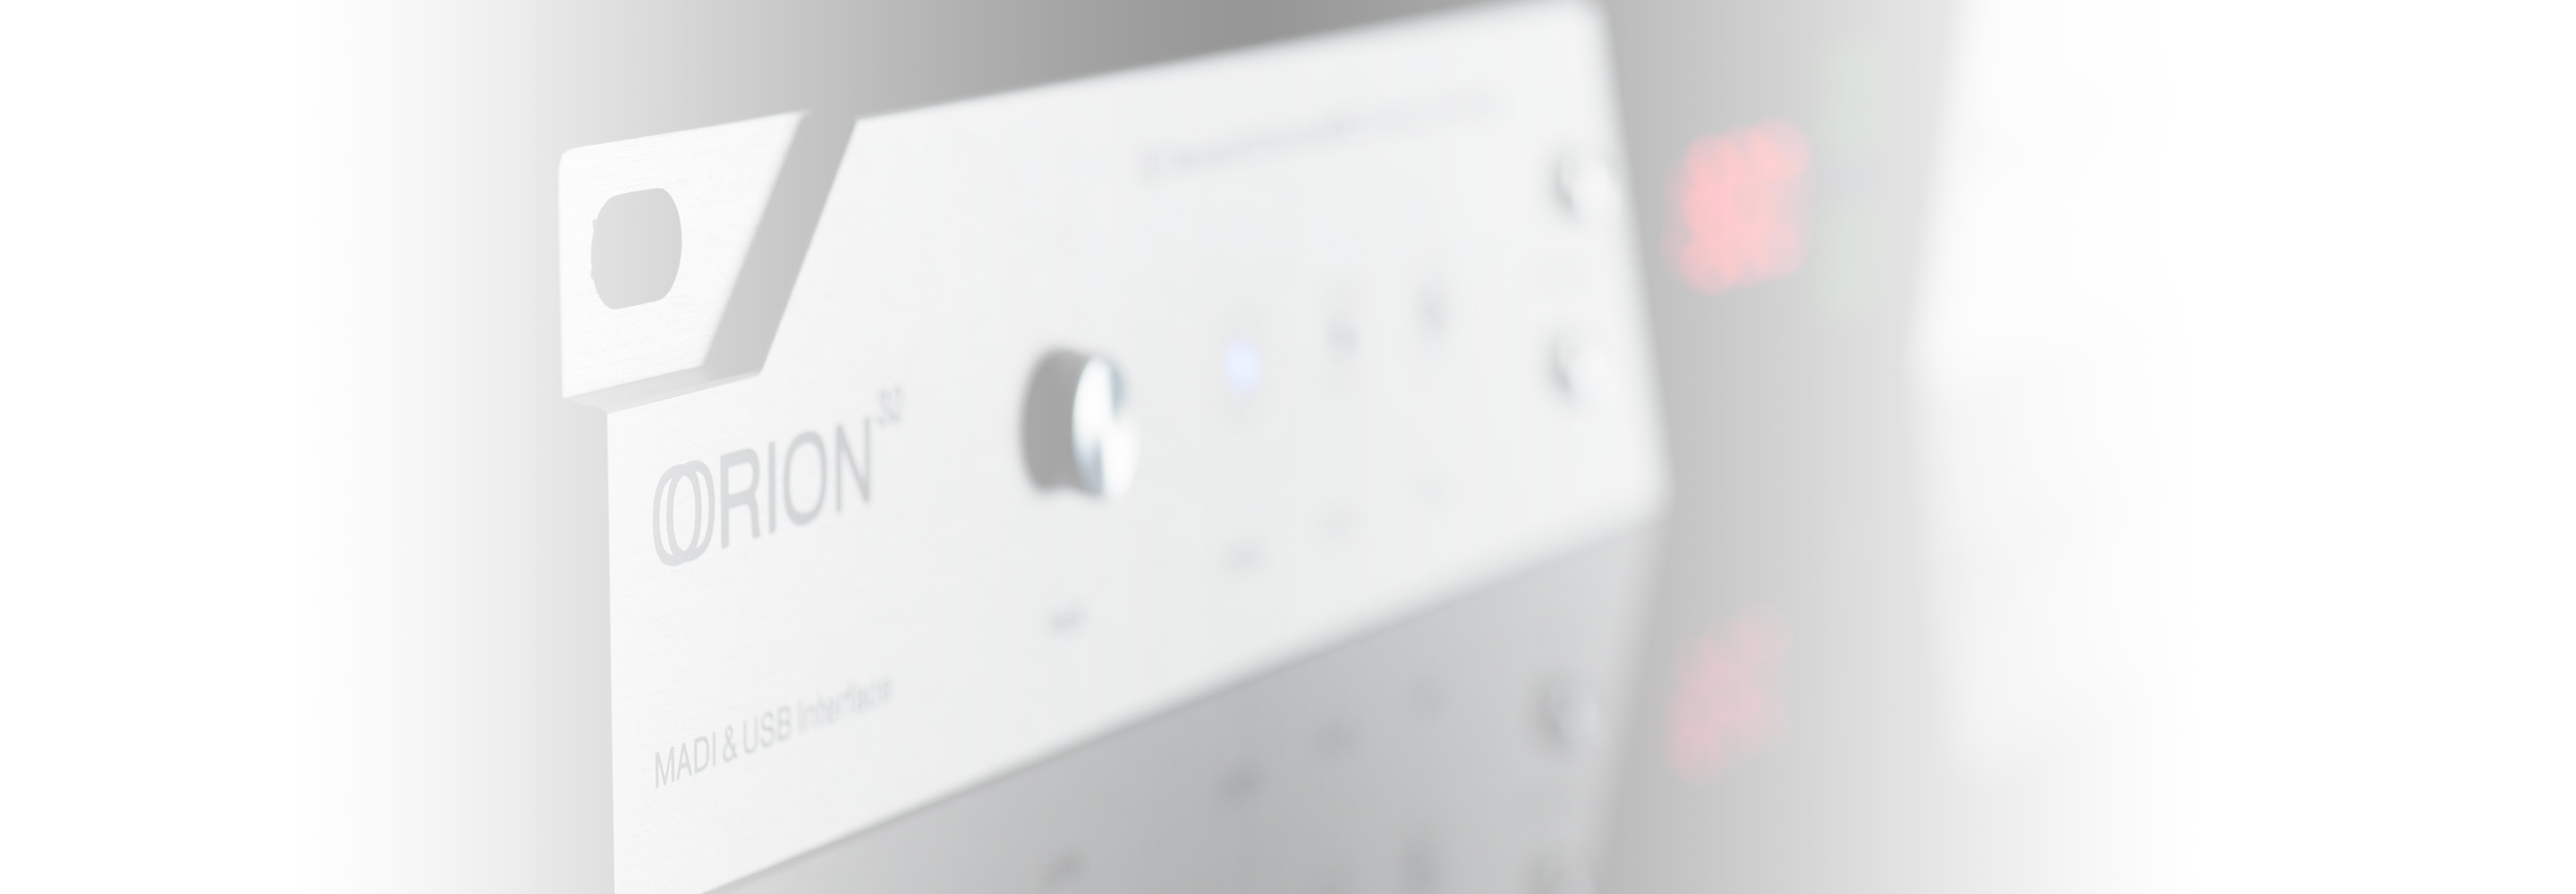 Orion³² AD/DA Audio Interface is Nominated for PAR Excellence Award and SOS Award